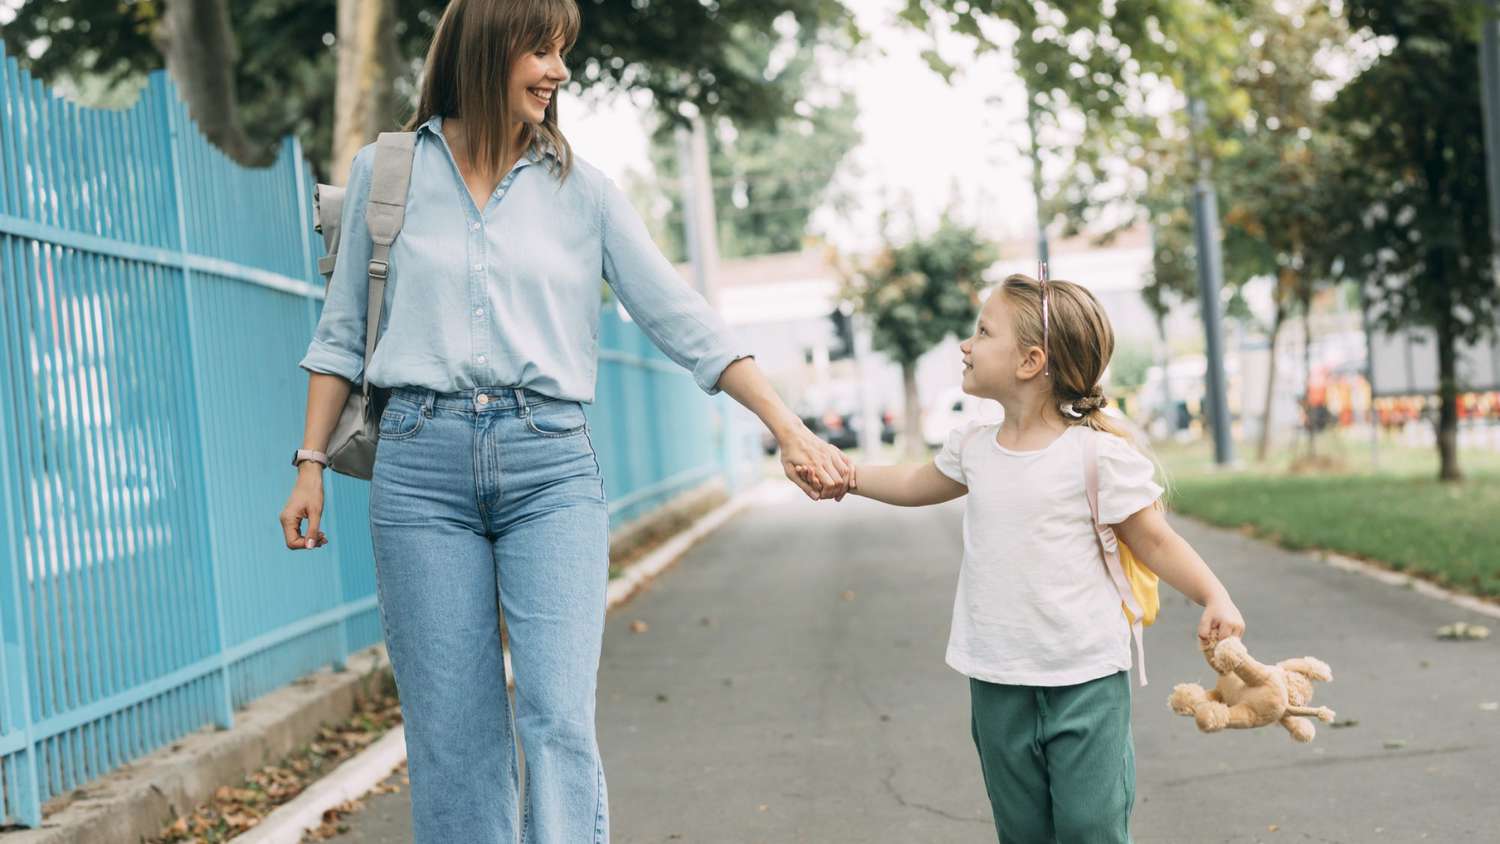 An image of a woman holding her daughter's hand while walking.